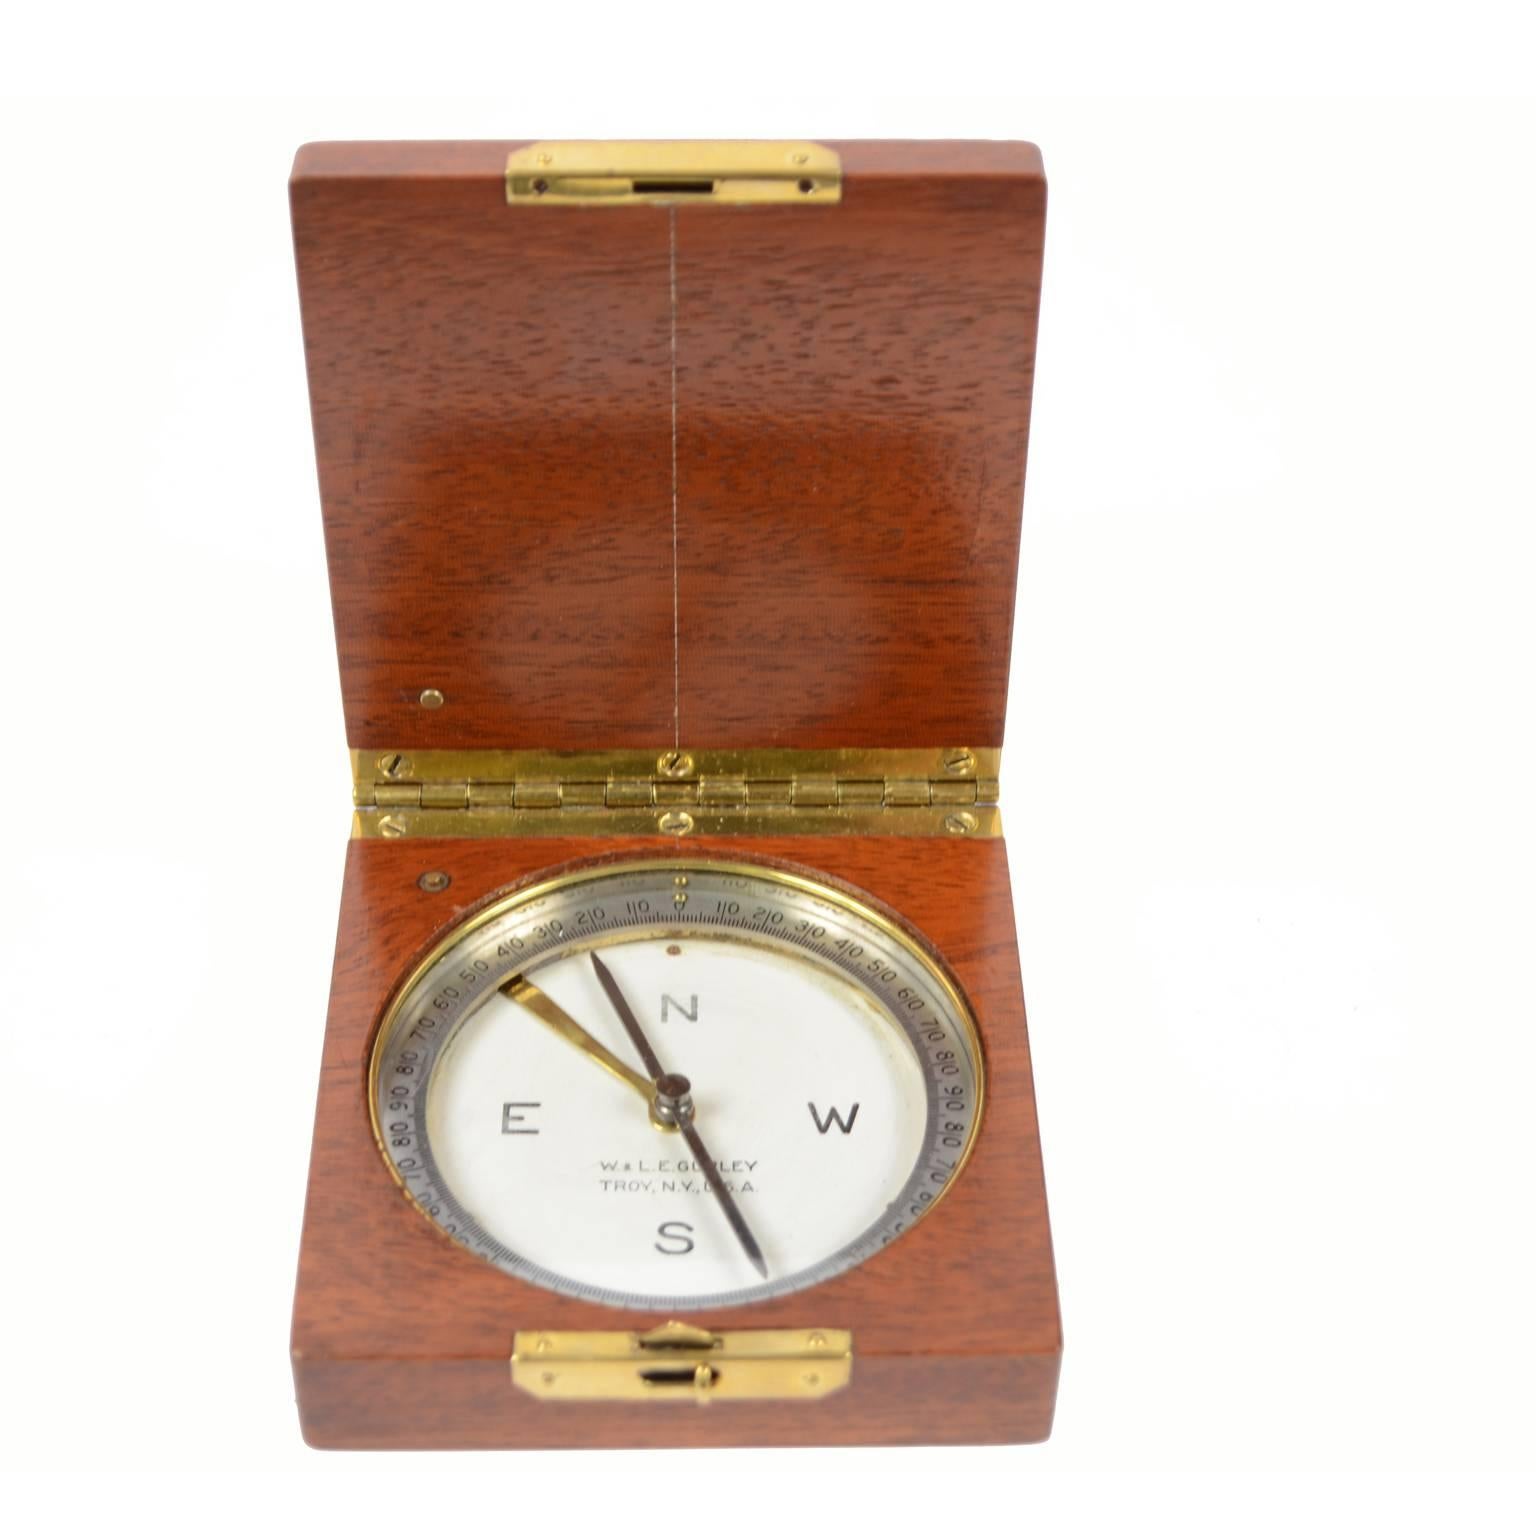 Topographic compass, wooden and brass, signed W. & L. E. Gurley Troy USA of the late 19th century. Compass complete with a goniometric circle and needle lock for the calculation of horizontal angles. The firm W. & L. E. Gurley was a company active